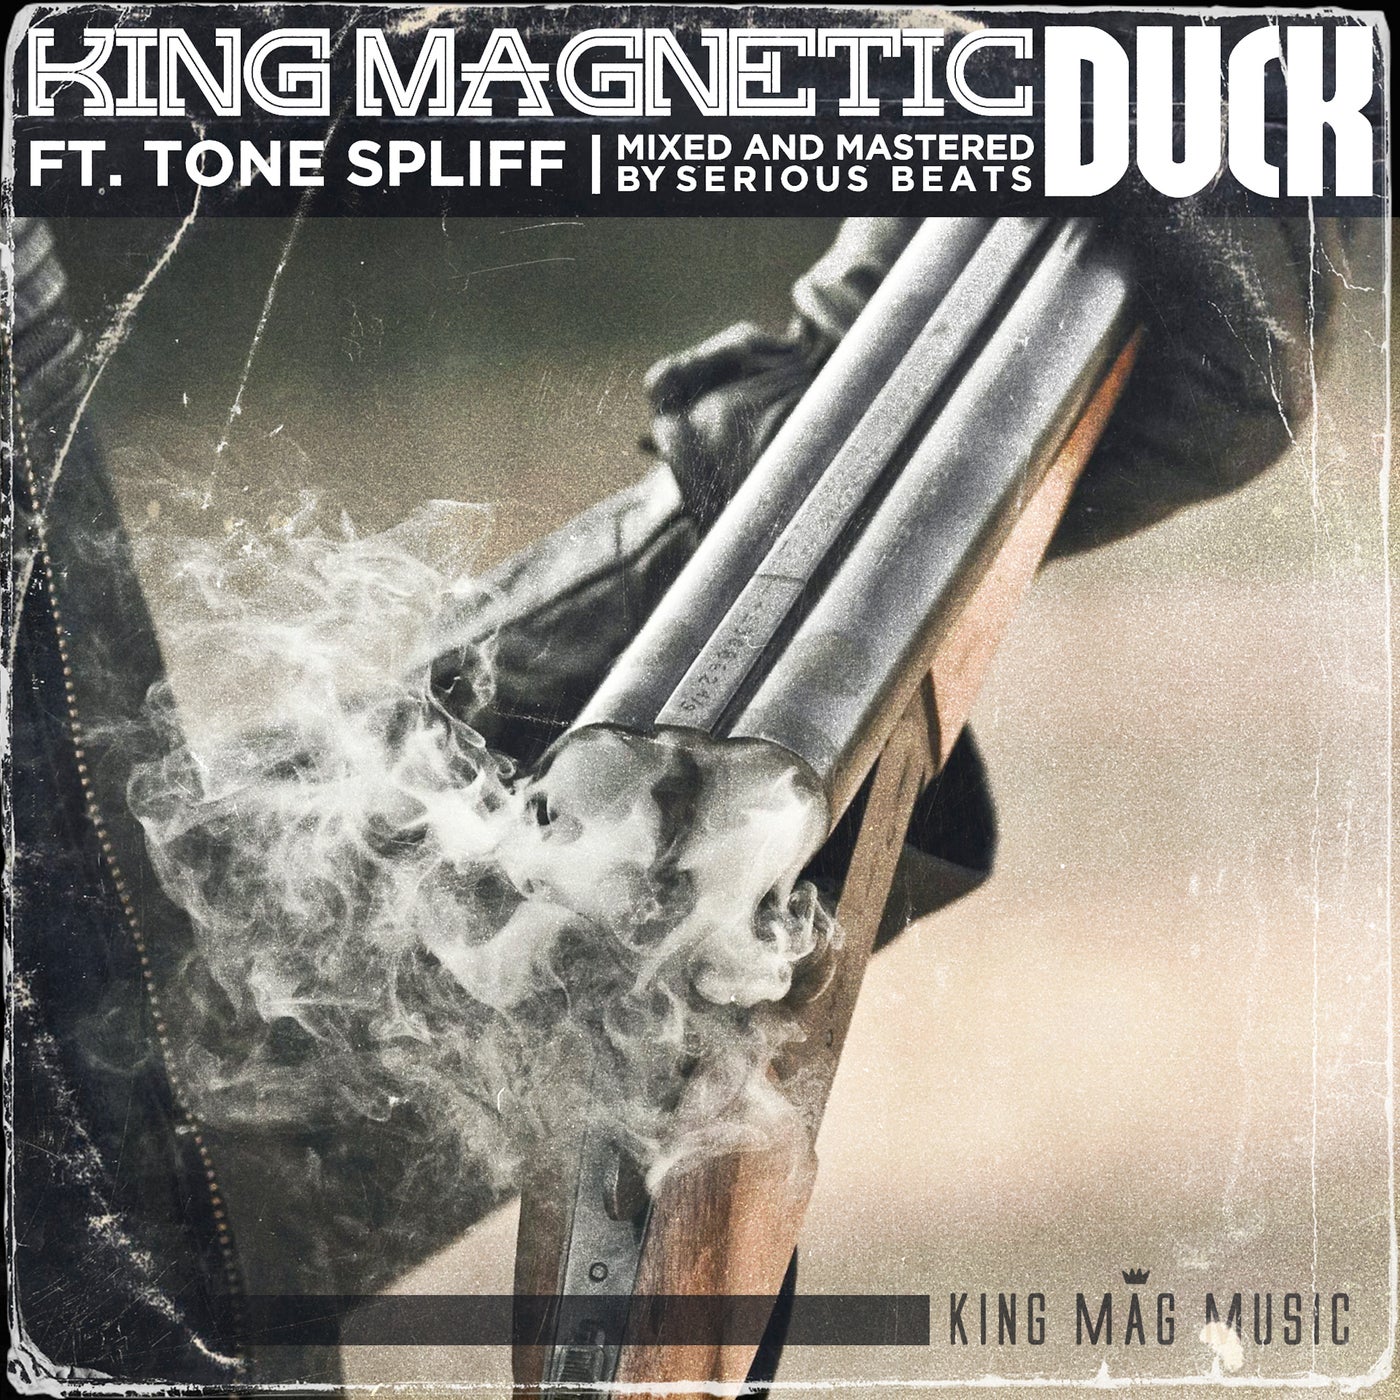 Tone feat. King Magnetic. Duck feat соус.